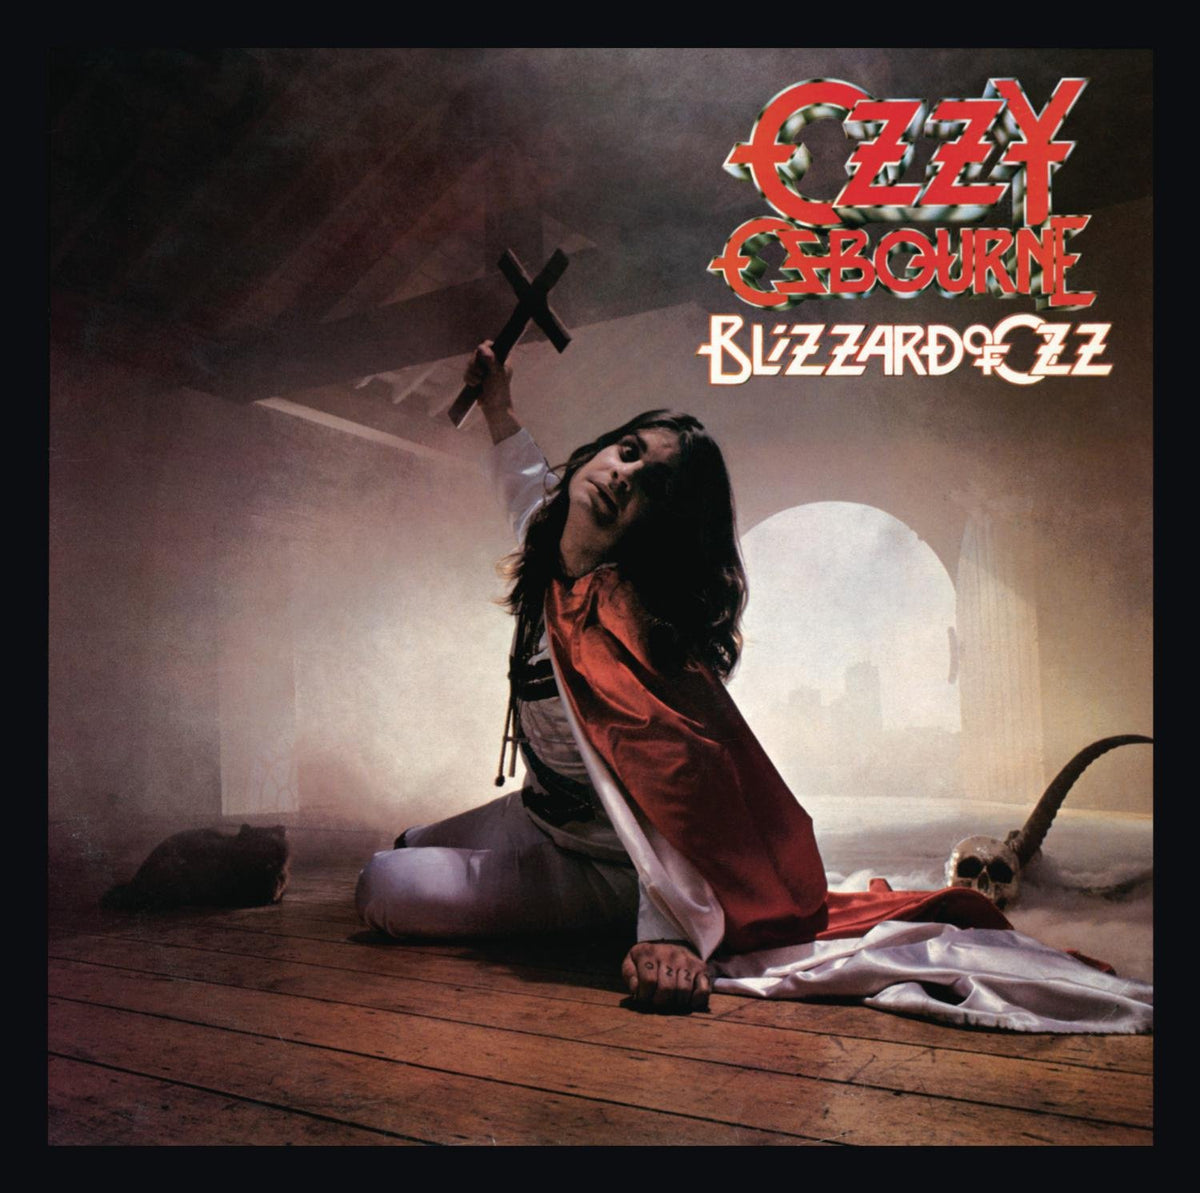 Ozzy Osbourne - Blizzard Of Ozz LP (Limited Edition Silver With Red Swirl Colored Vinyl)